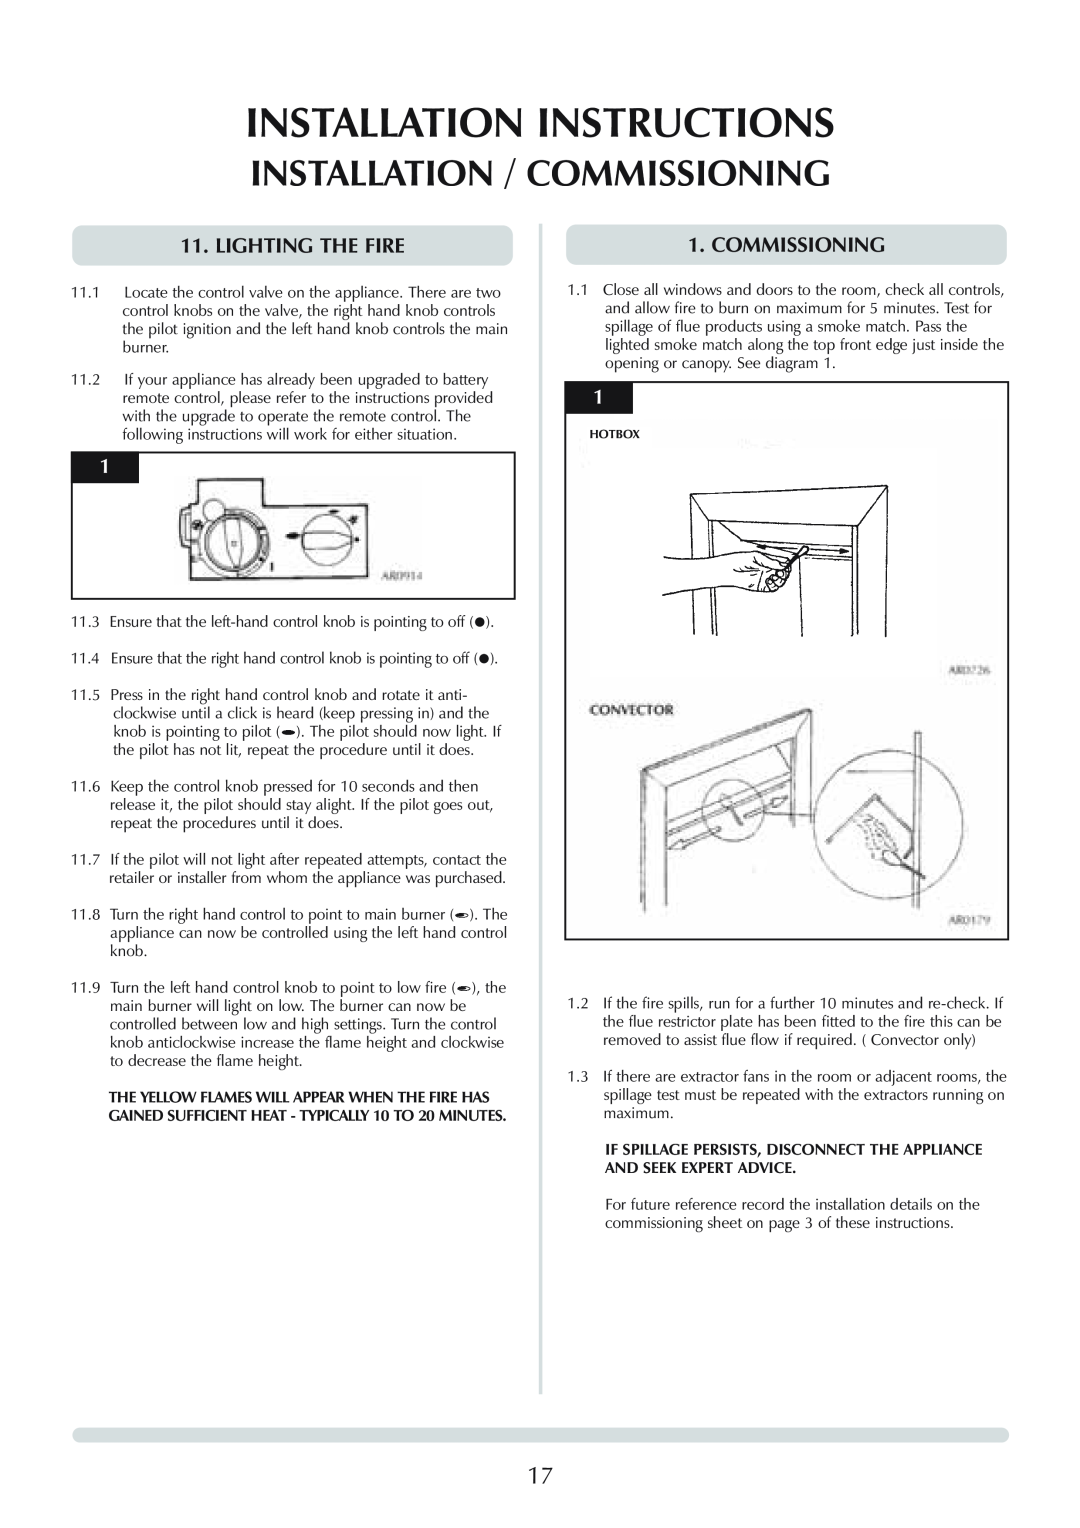 Stovax Logic Hotbox & Convector Fire manual Installation / Commissioning, Installation Instructions, Lighting The Fire 